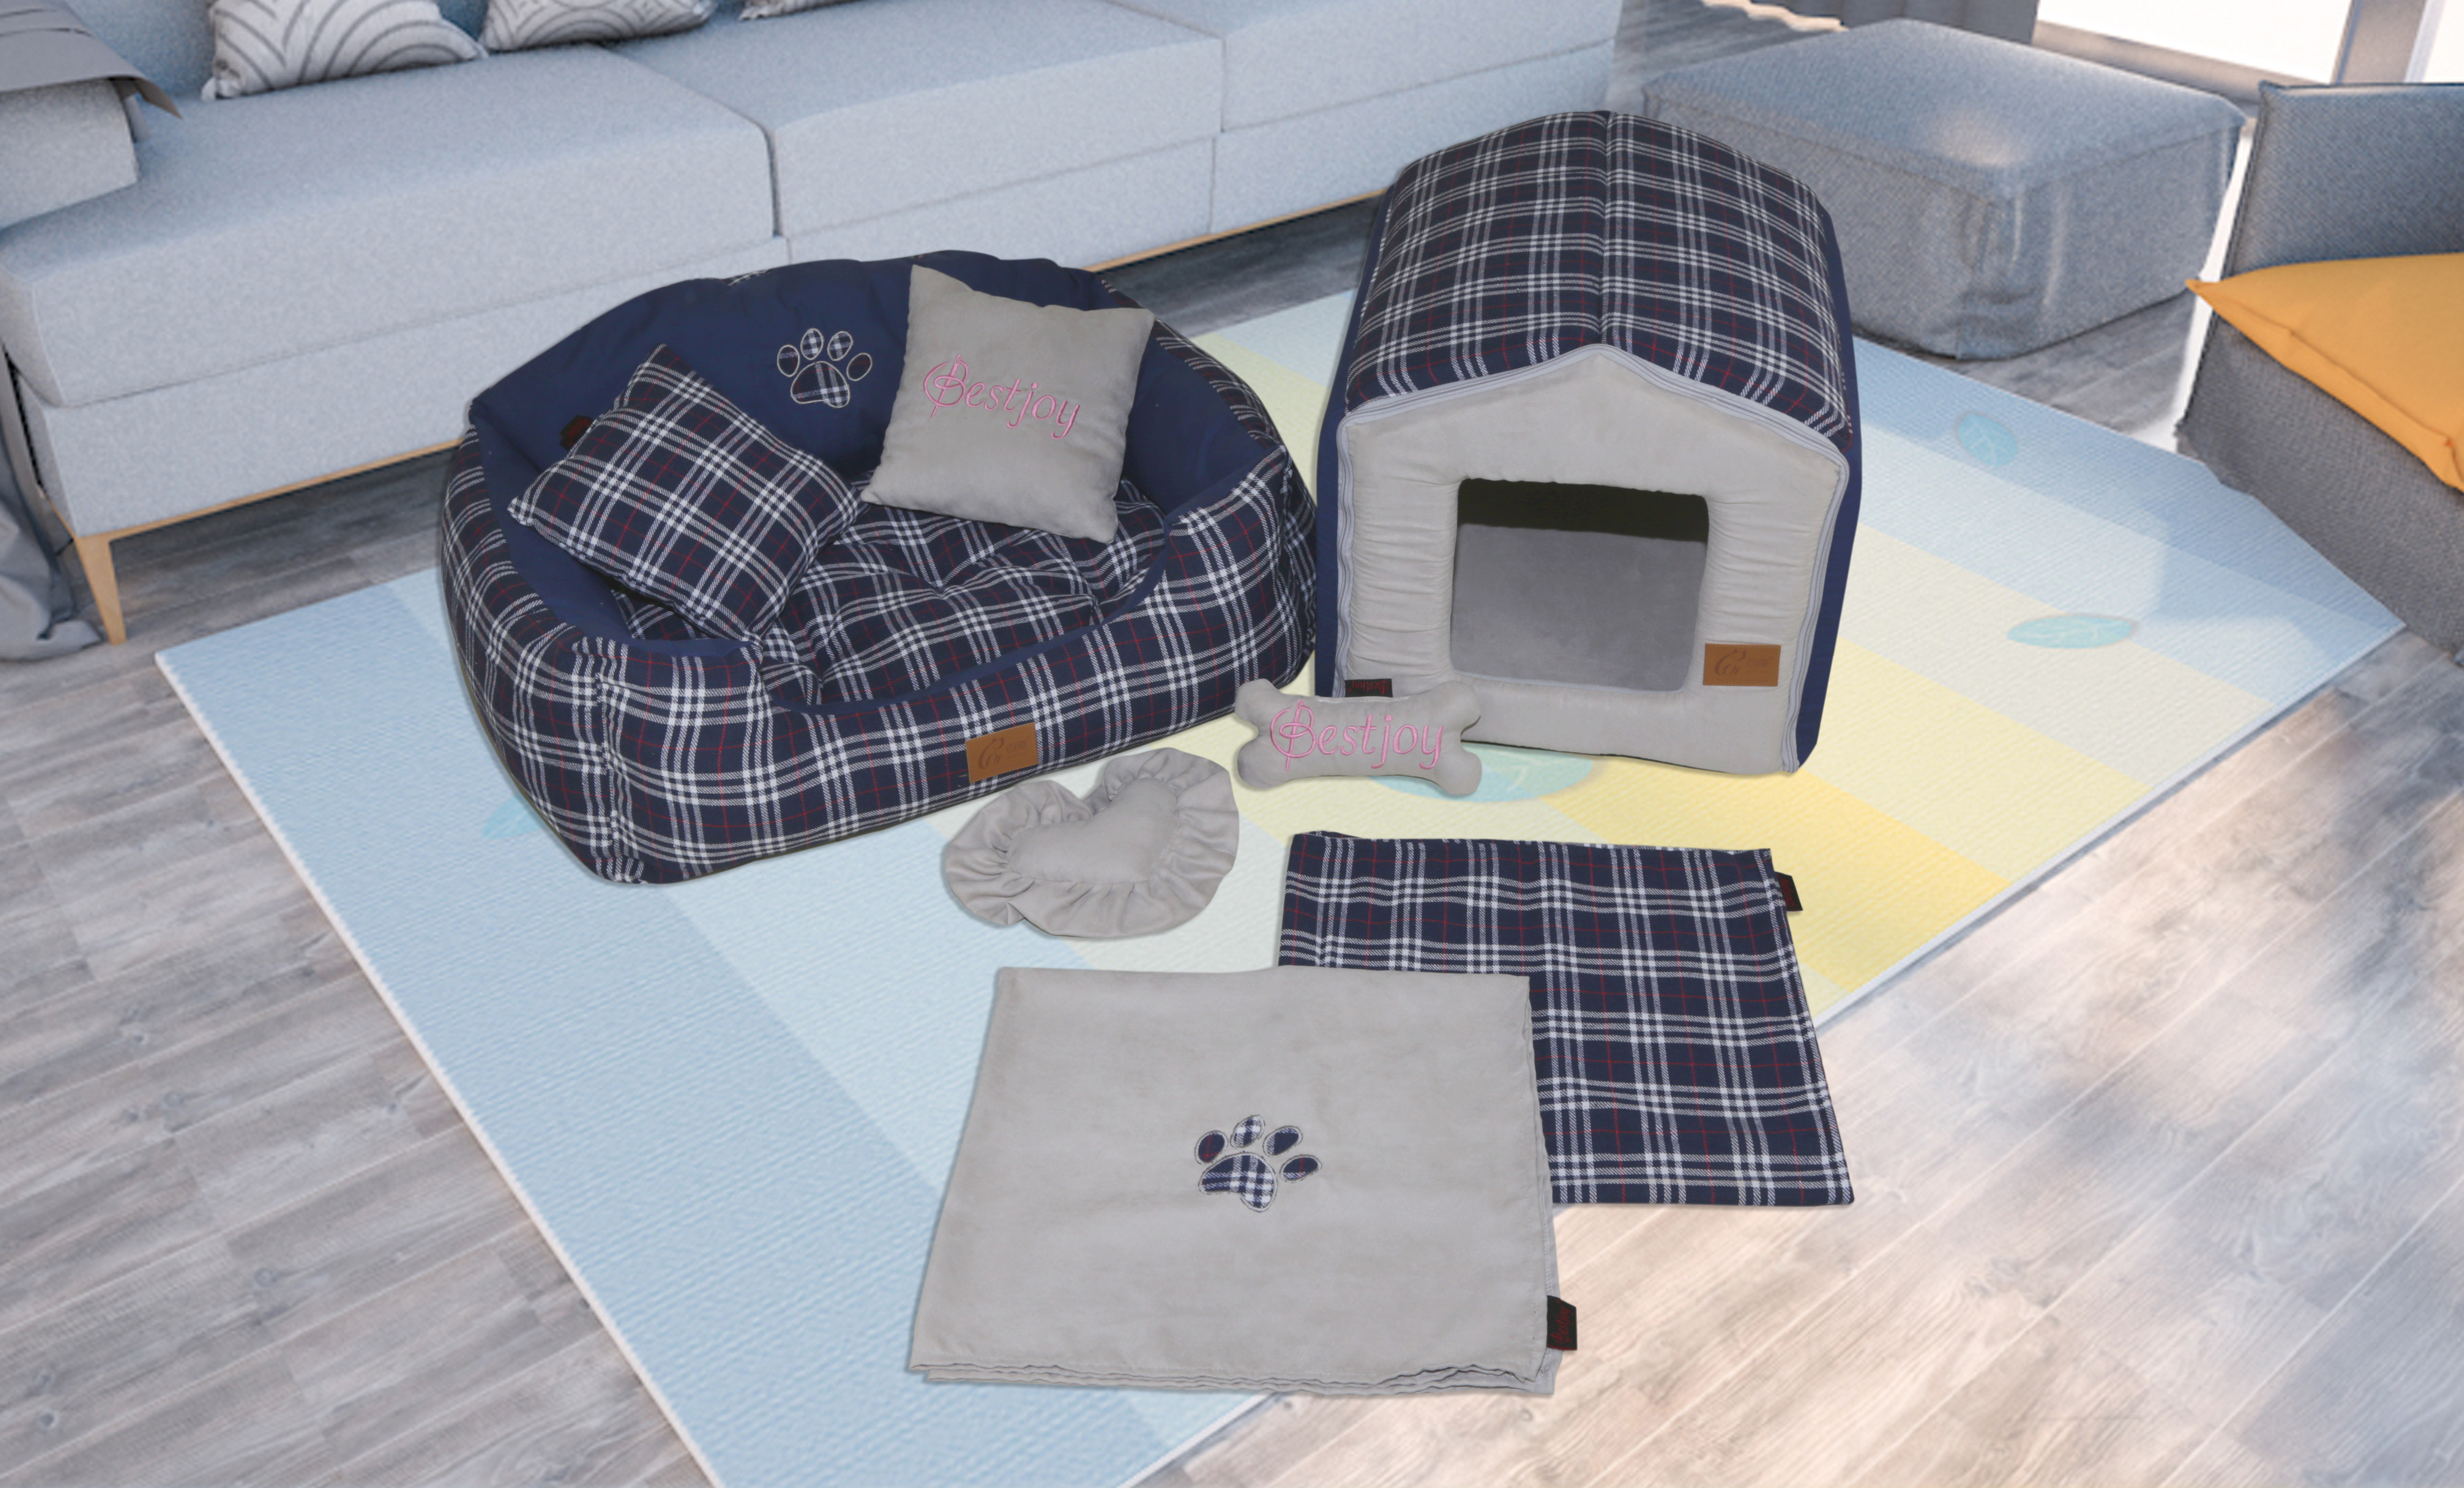 Designer Pet Bed in Gray Navy England Blue Tartan Plaid Cotton Prince Dog Bed Cat Sofa Custom Handmade Cushion Puppy House Pet Birthday Gift With Paw Applique Blanket Heart Shape Pillow Bone Shape Toy